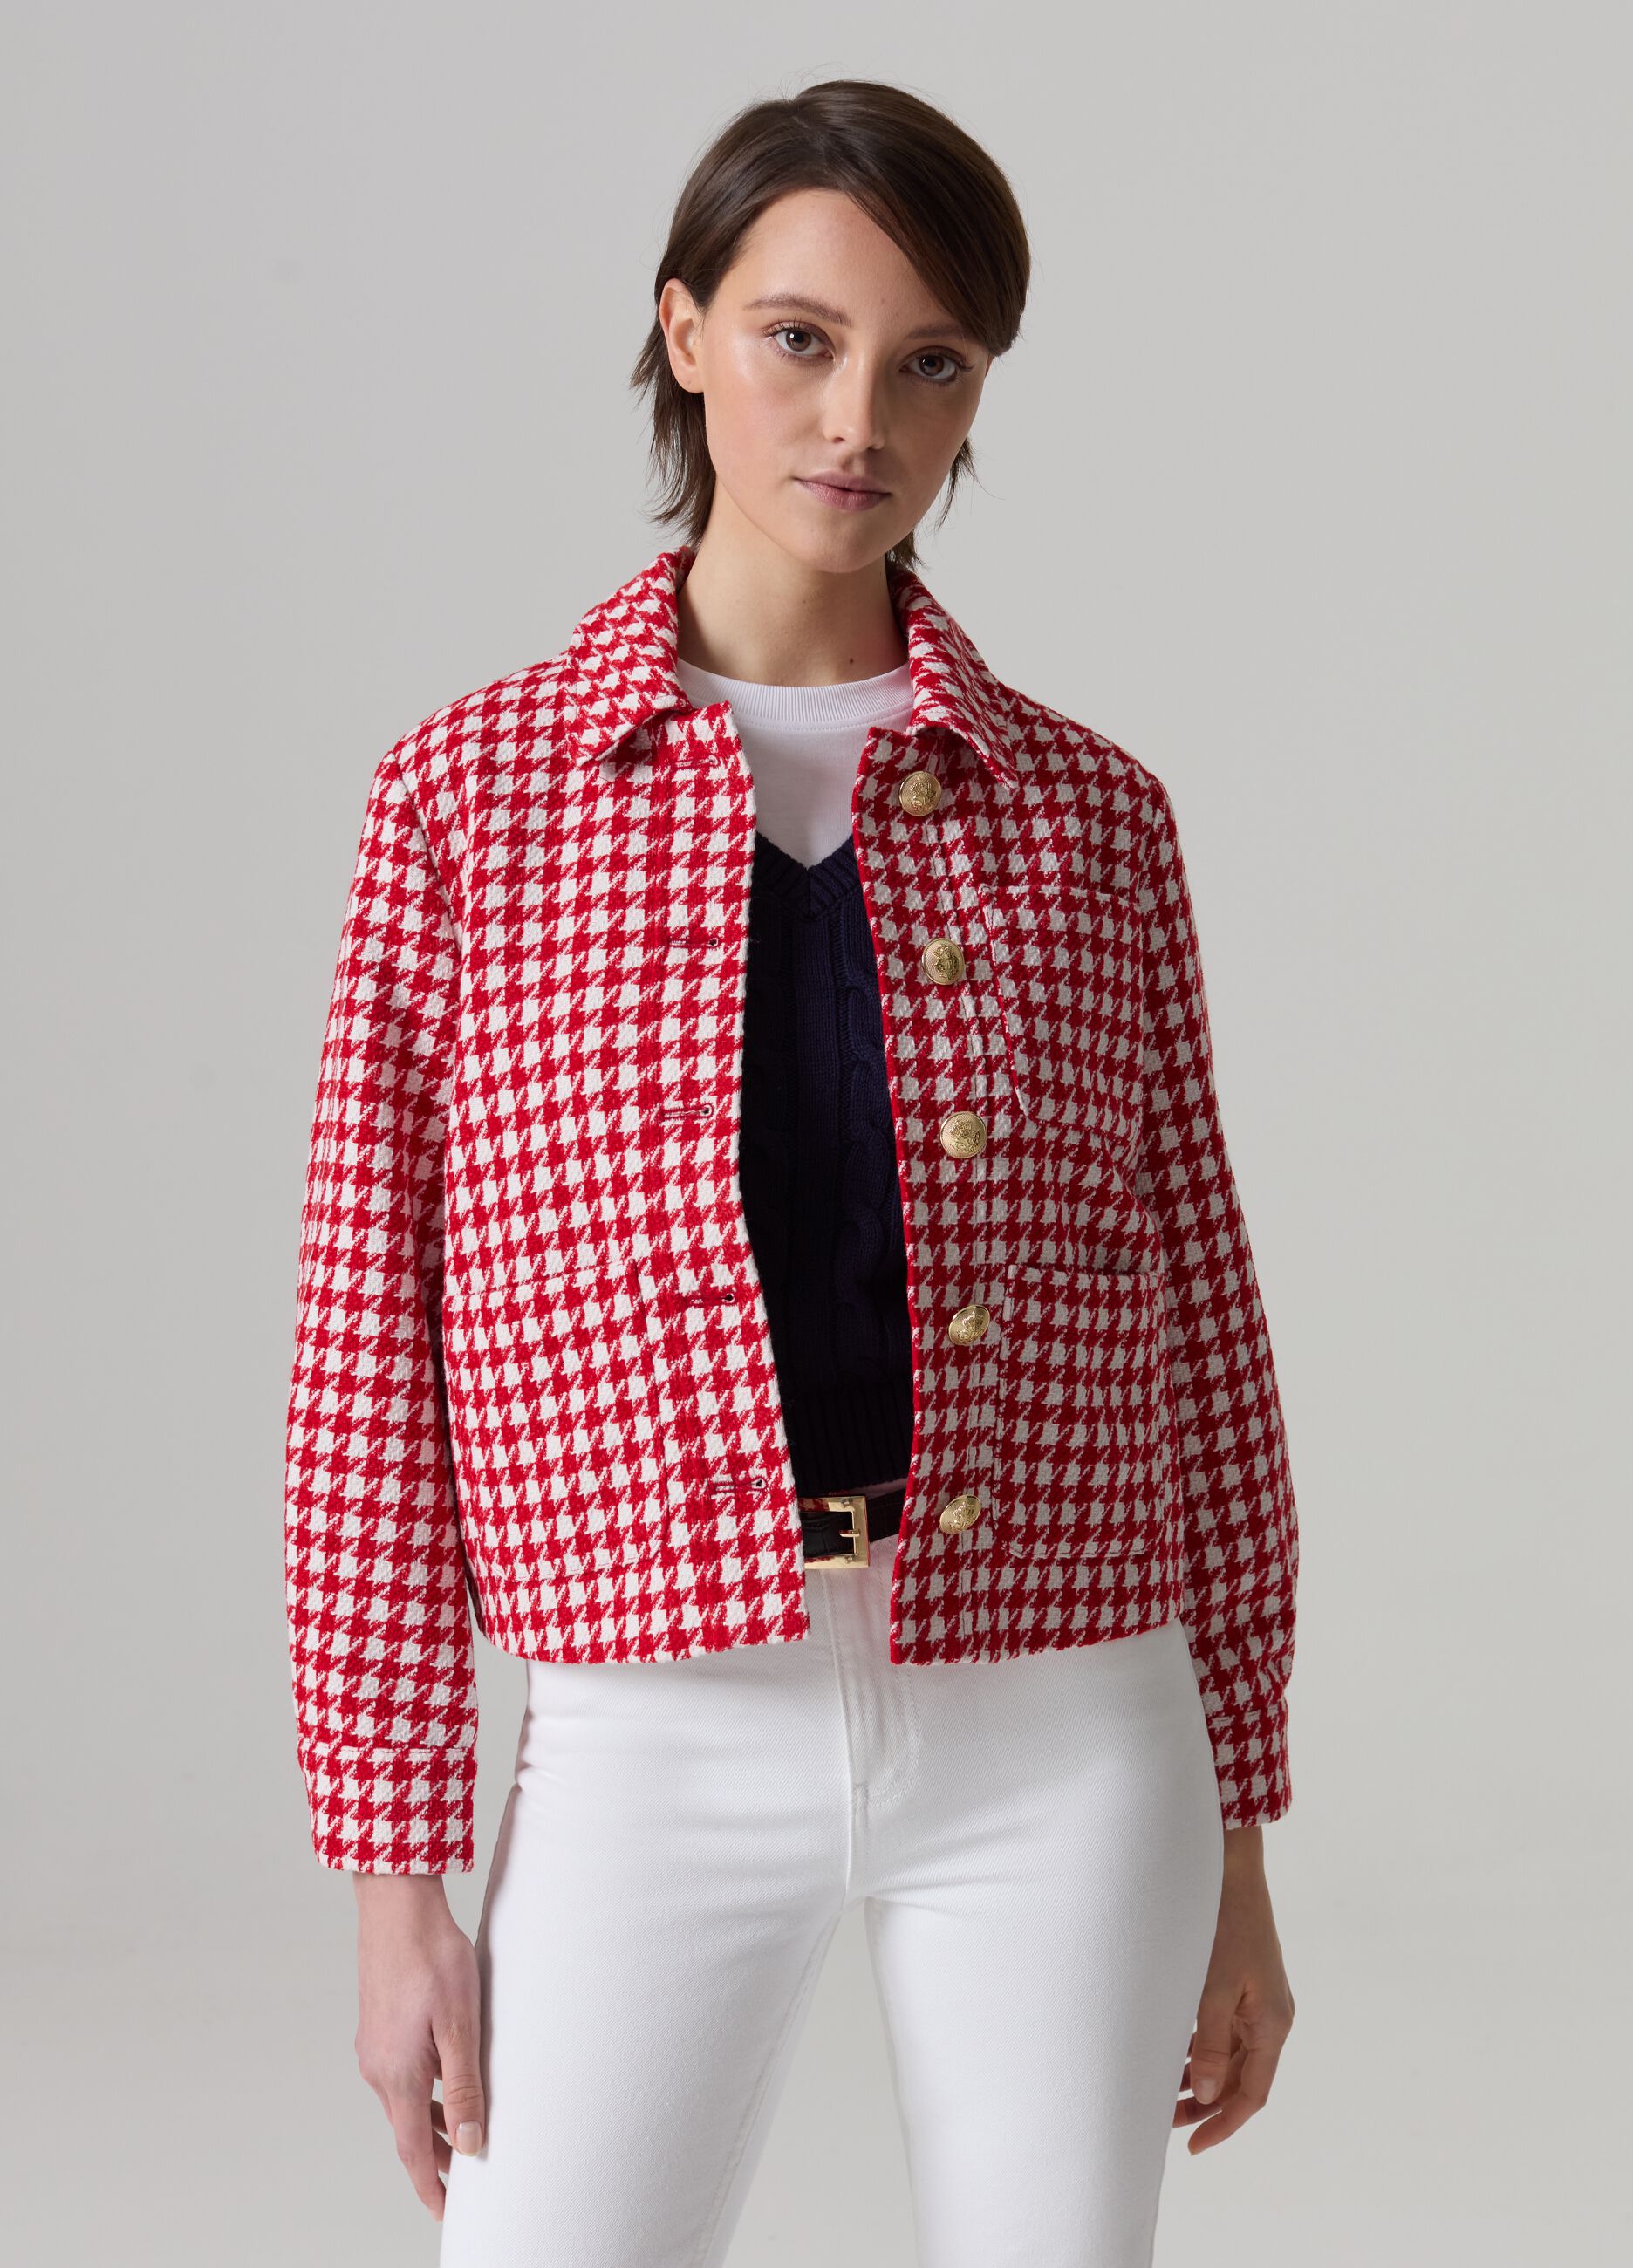 Houndstooth jacket with buttons